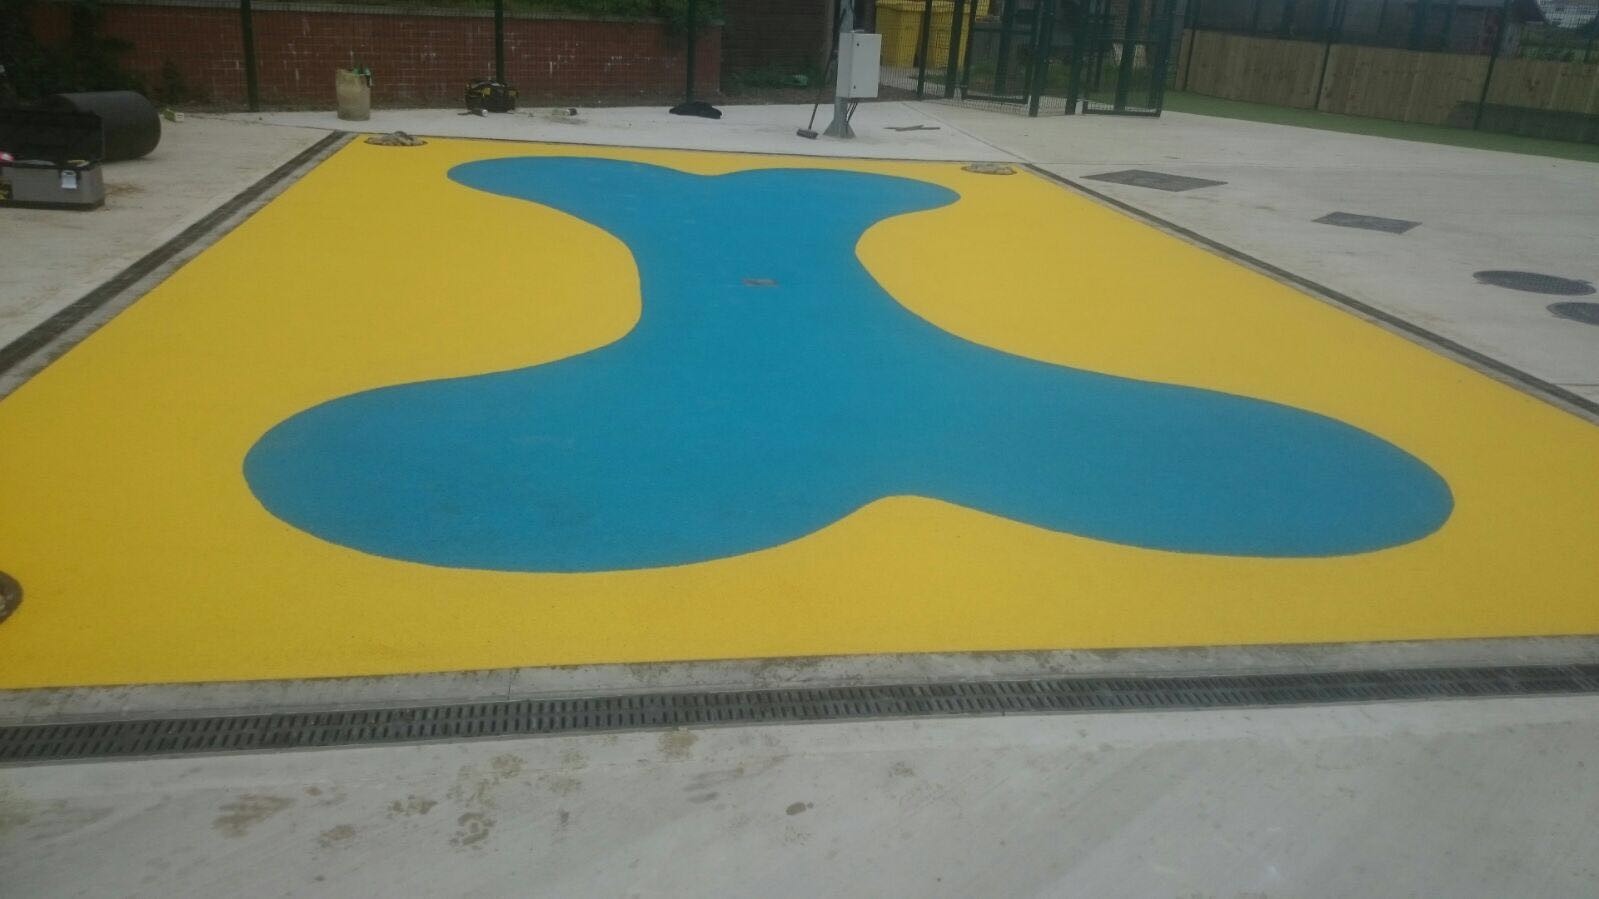 Yllow and blue Safety Surfacing Poured Design with wetpour rubber in the shape of a large bone